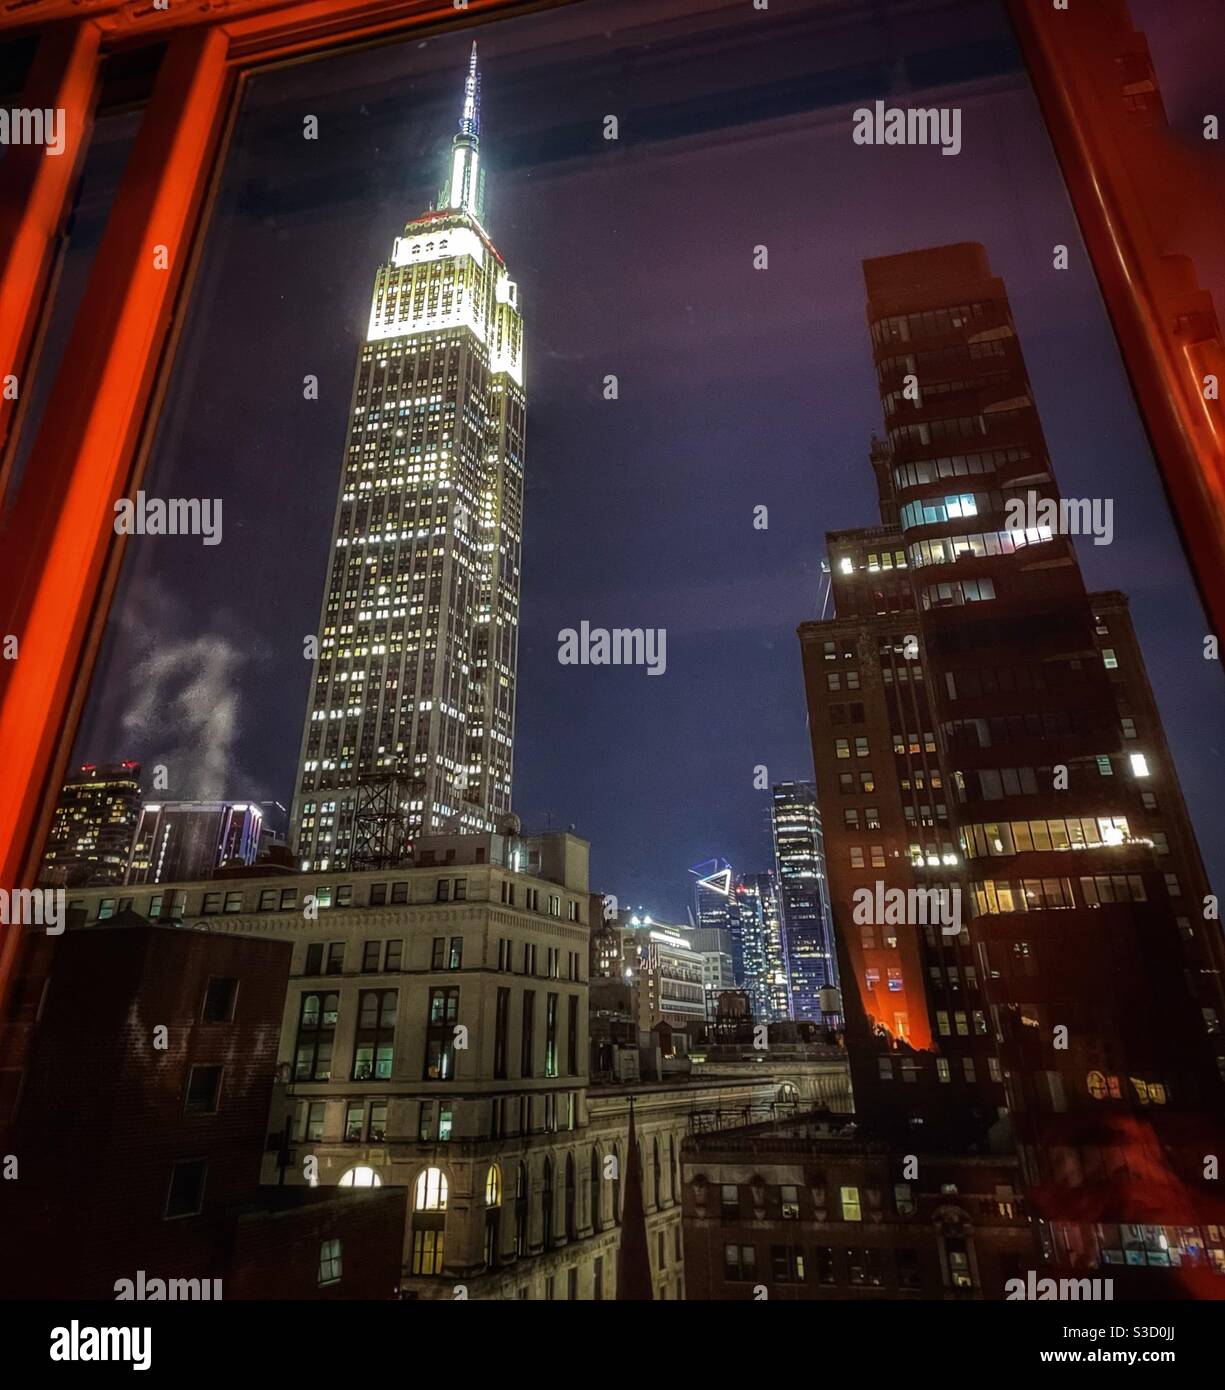 A Weat Facing Evening View Out An Apartment Window Of New York City Skyscrapers Punctuated By The Glamorous Landmark Empire State Building Lit Up With White Lights Hudson Yards In The Background